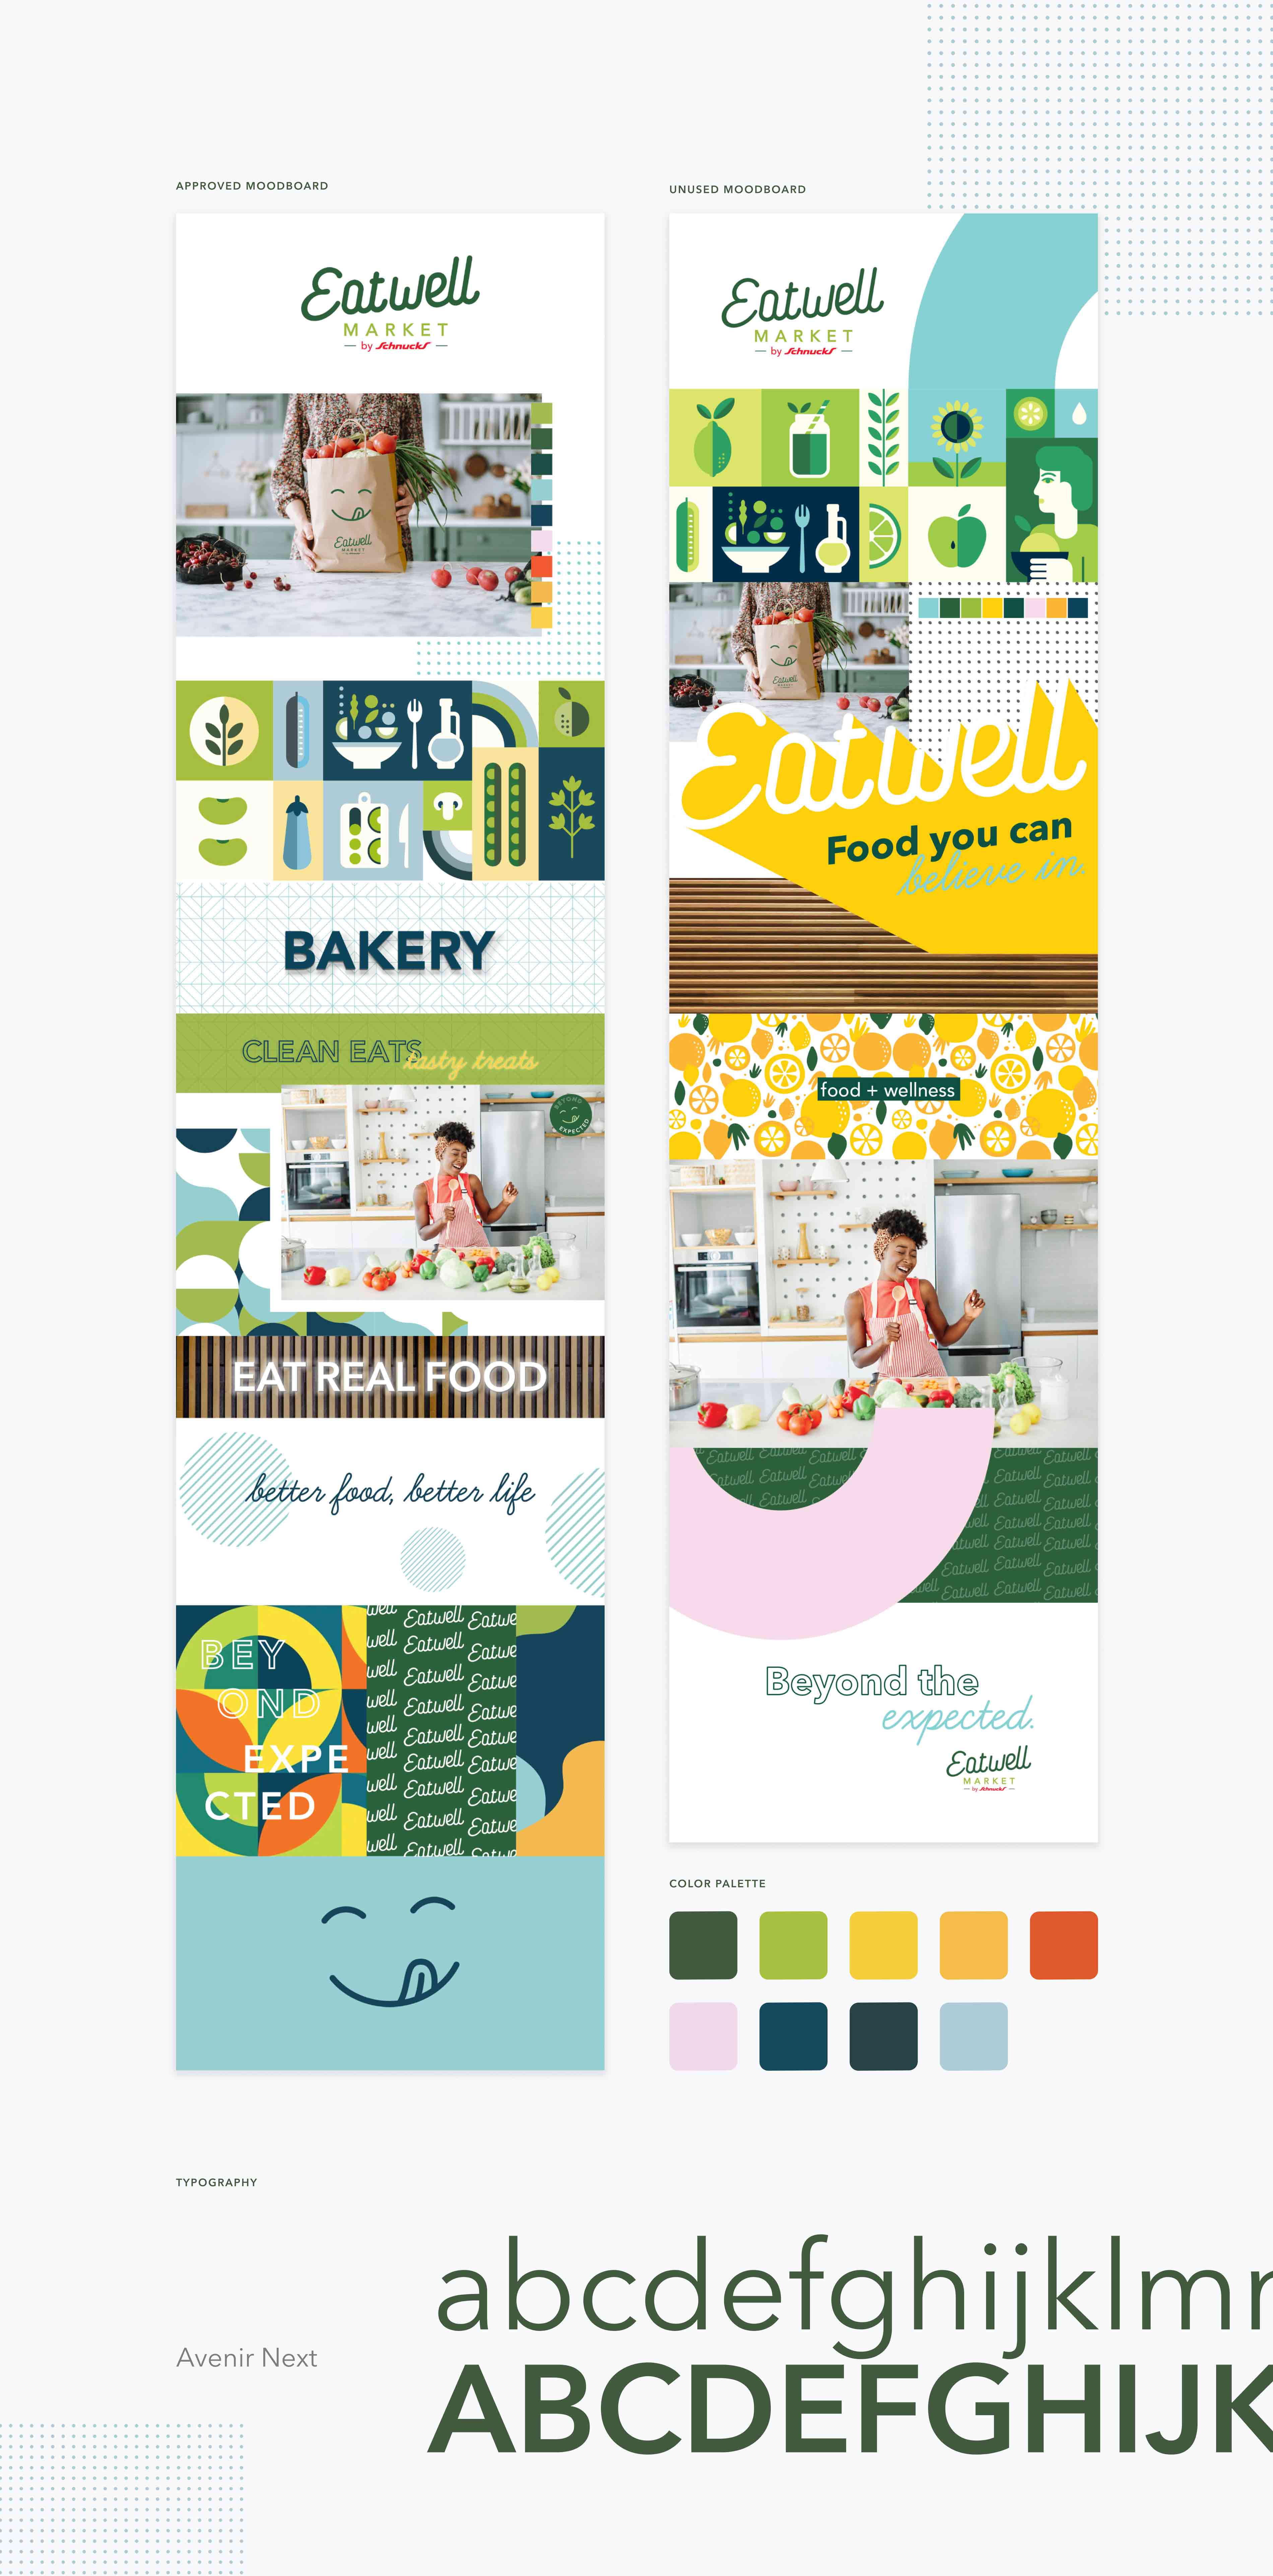 Eatwell grocery store brand identity moodboard and typography